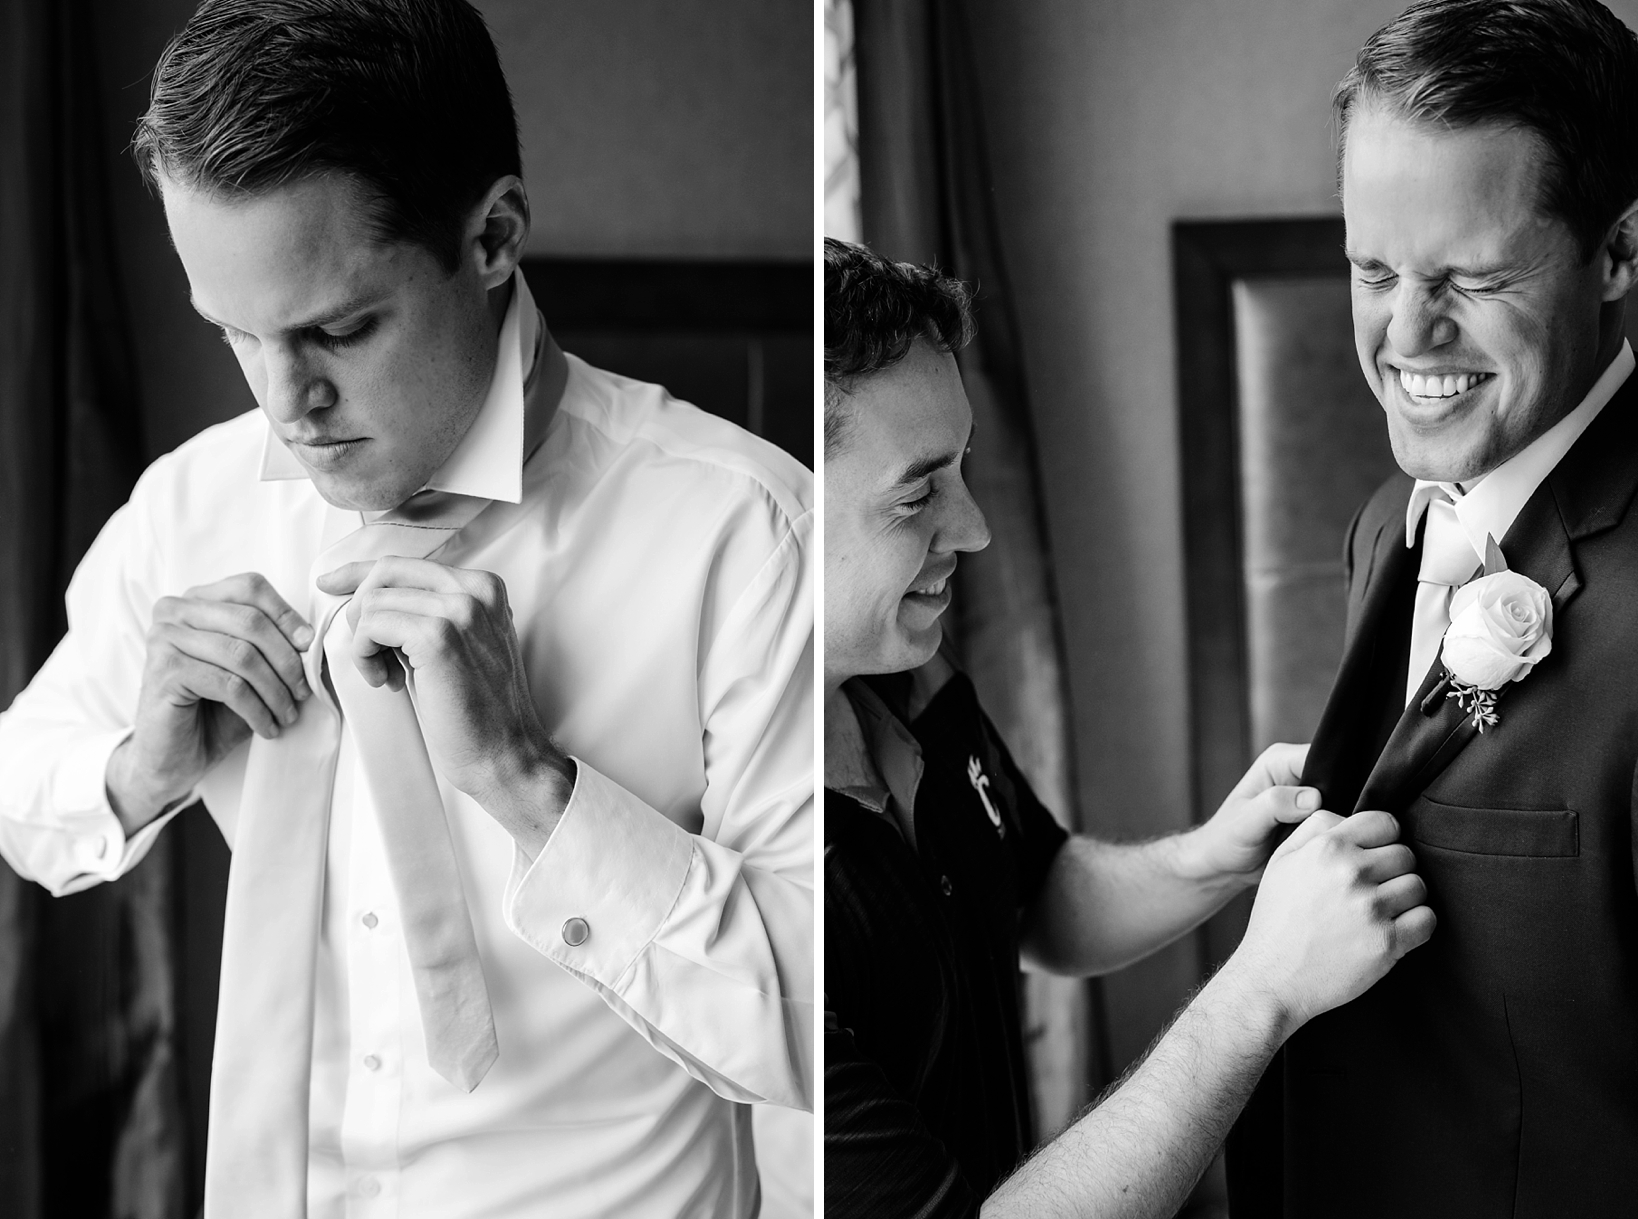 Groom getting ready for his wedding and with a little help from his friend in a funny moment in Tampa, FL